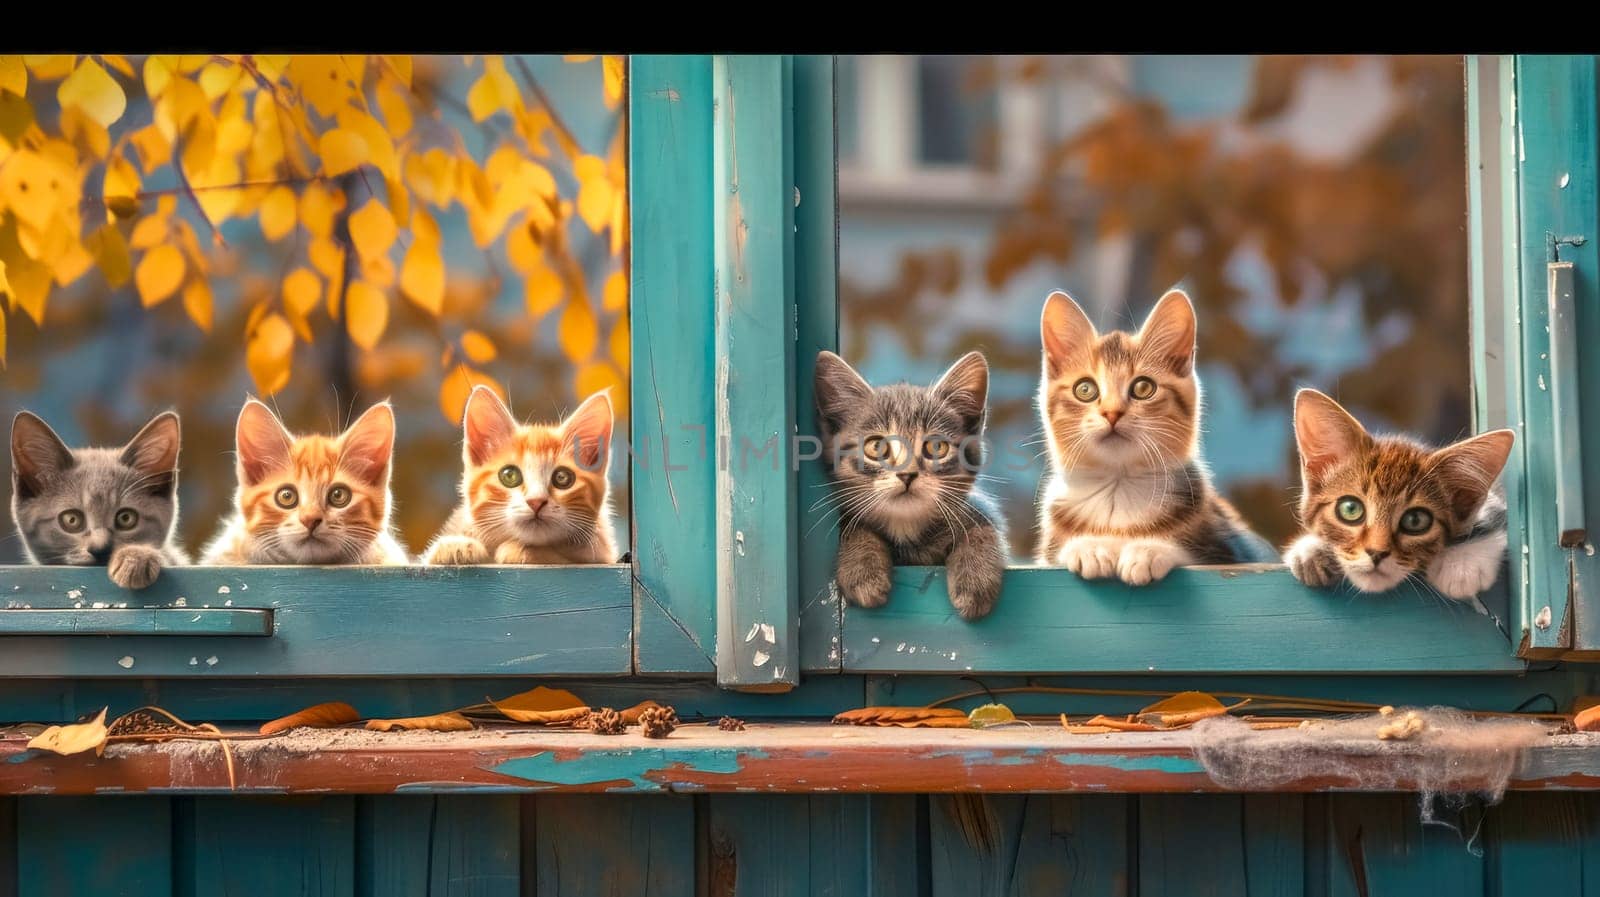 Charming kittens in a window frame by Edophoto